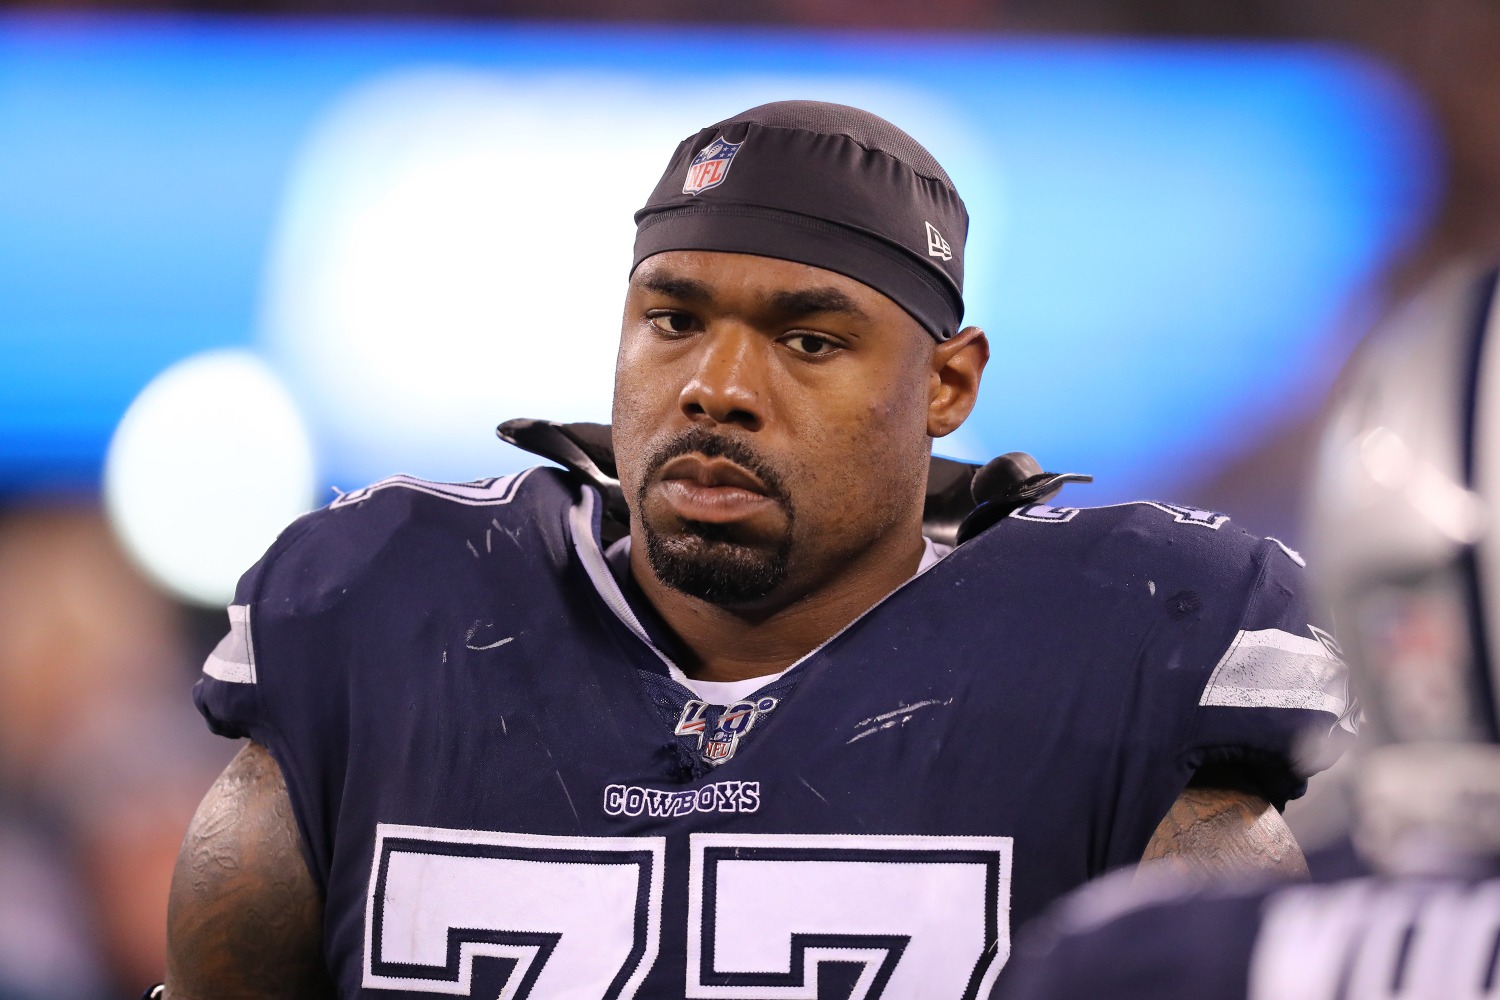 The Cowboys officially ruled Tyron Smith out for the rest of the season due to a neck injury.